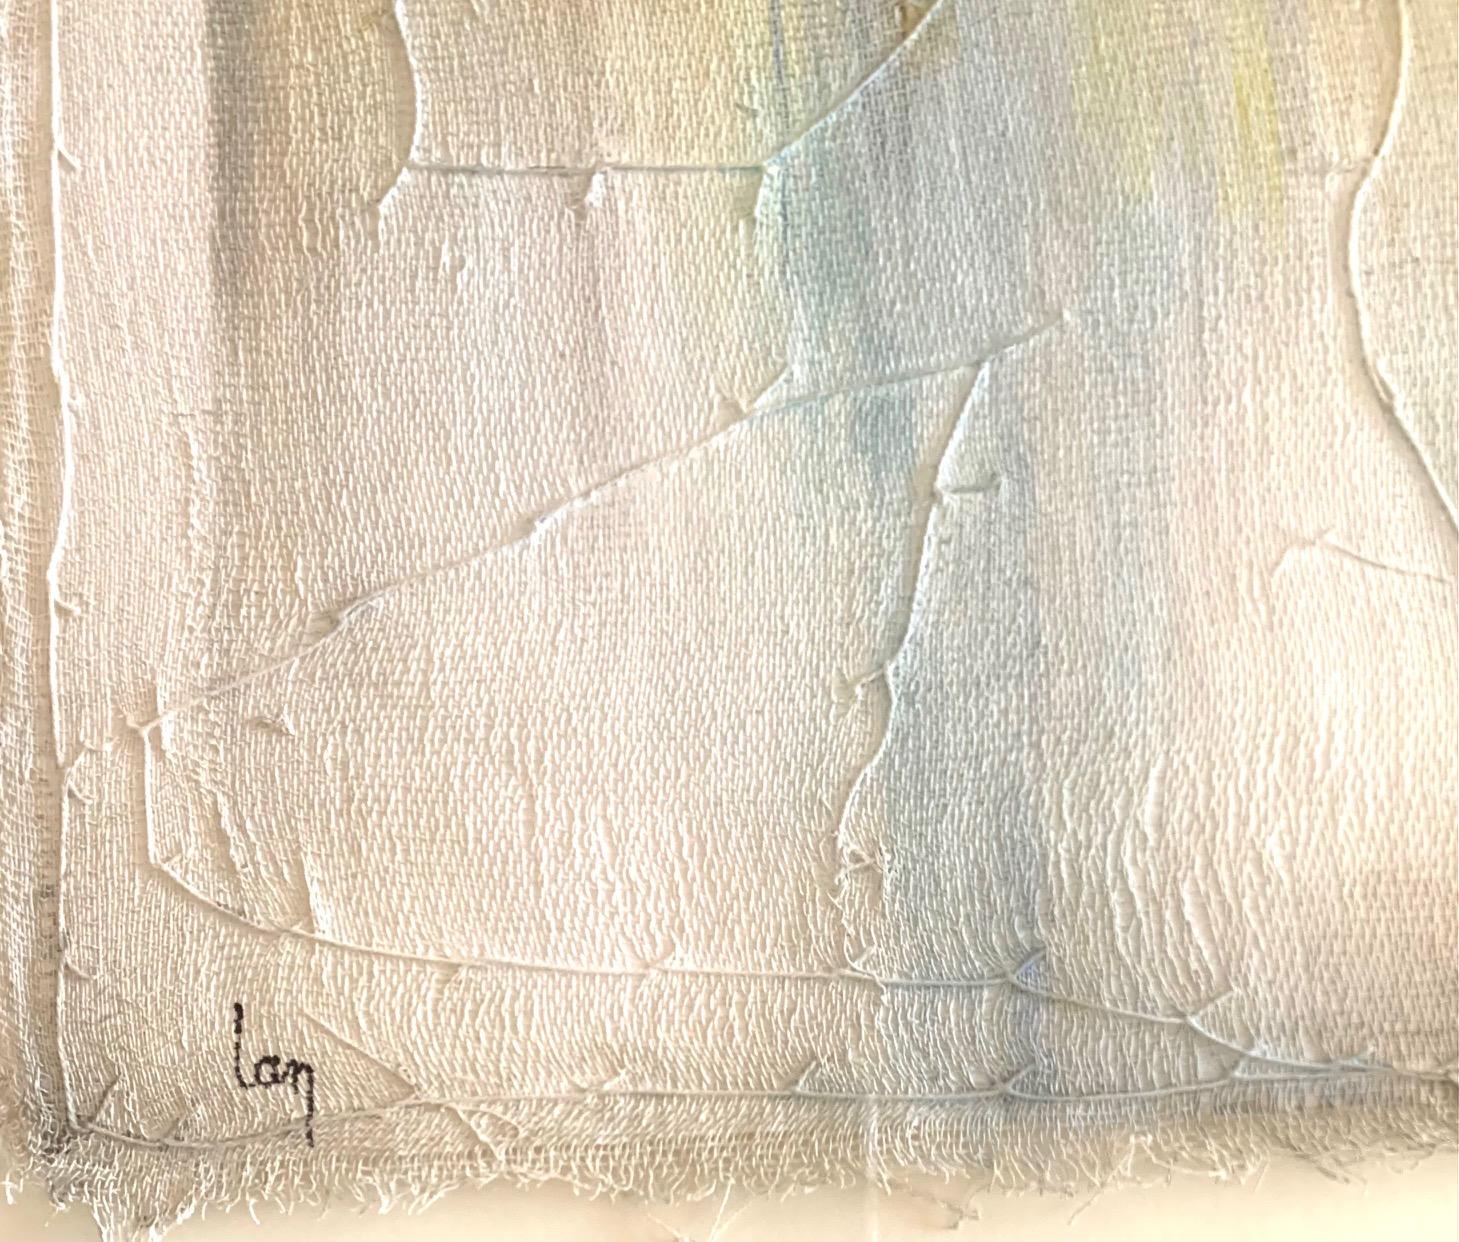 Contemporary Belgian artist Diane Petry creates her own three layer canvas using pima cotton, gauze and fine paper.
Raw edges and applied threads add texture and dimension.
Multi colored.
All artwork can be commissioned for any size and color